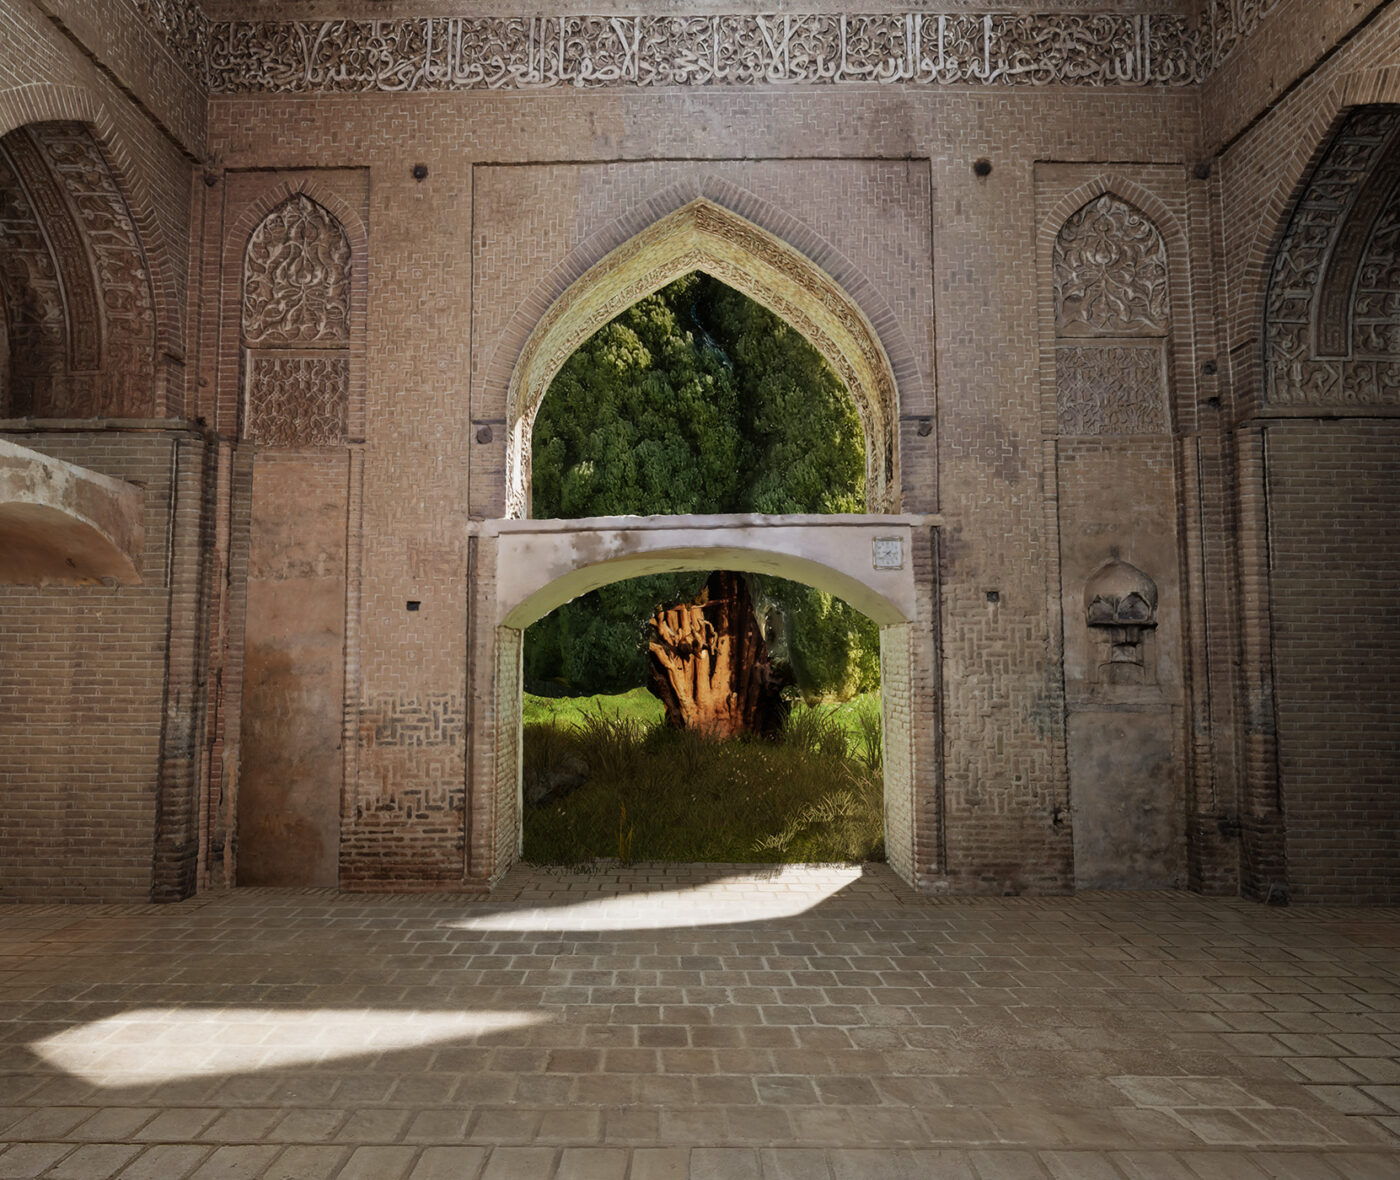 A virtual reality scene inside an 11th-century Persian mosque with a view outside